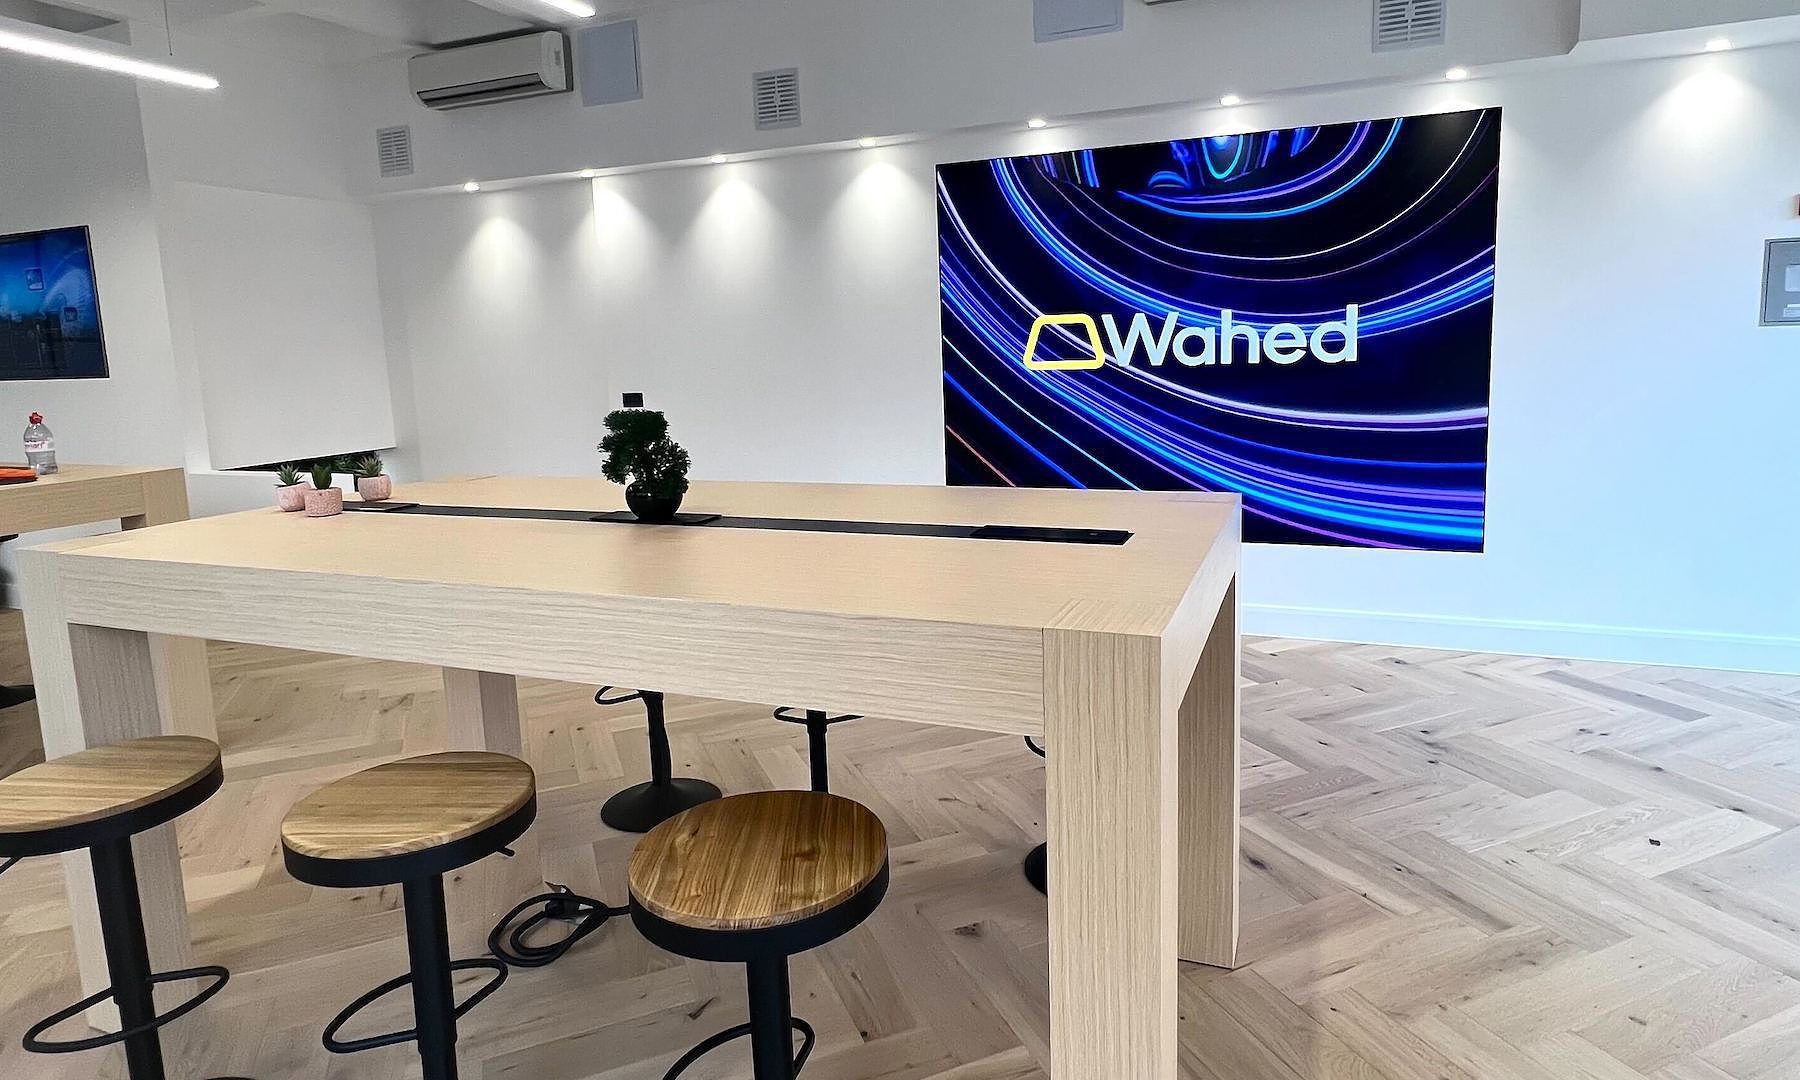 Islamic banking fintech Wahed acquires UK law firm to offer wills